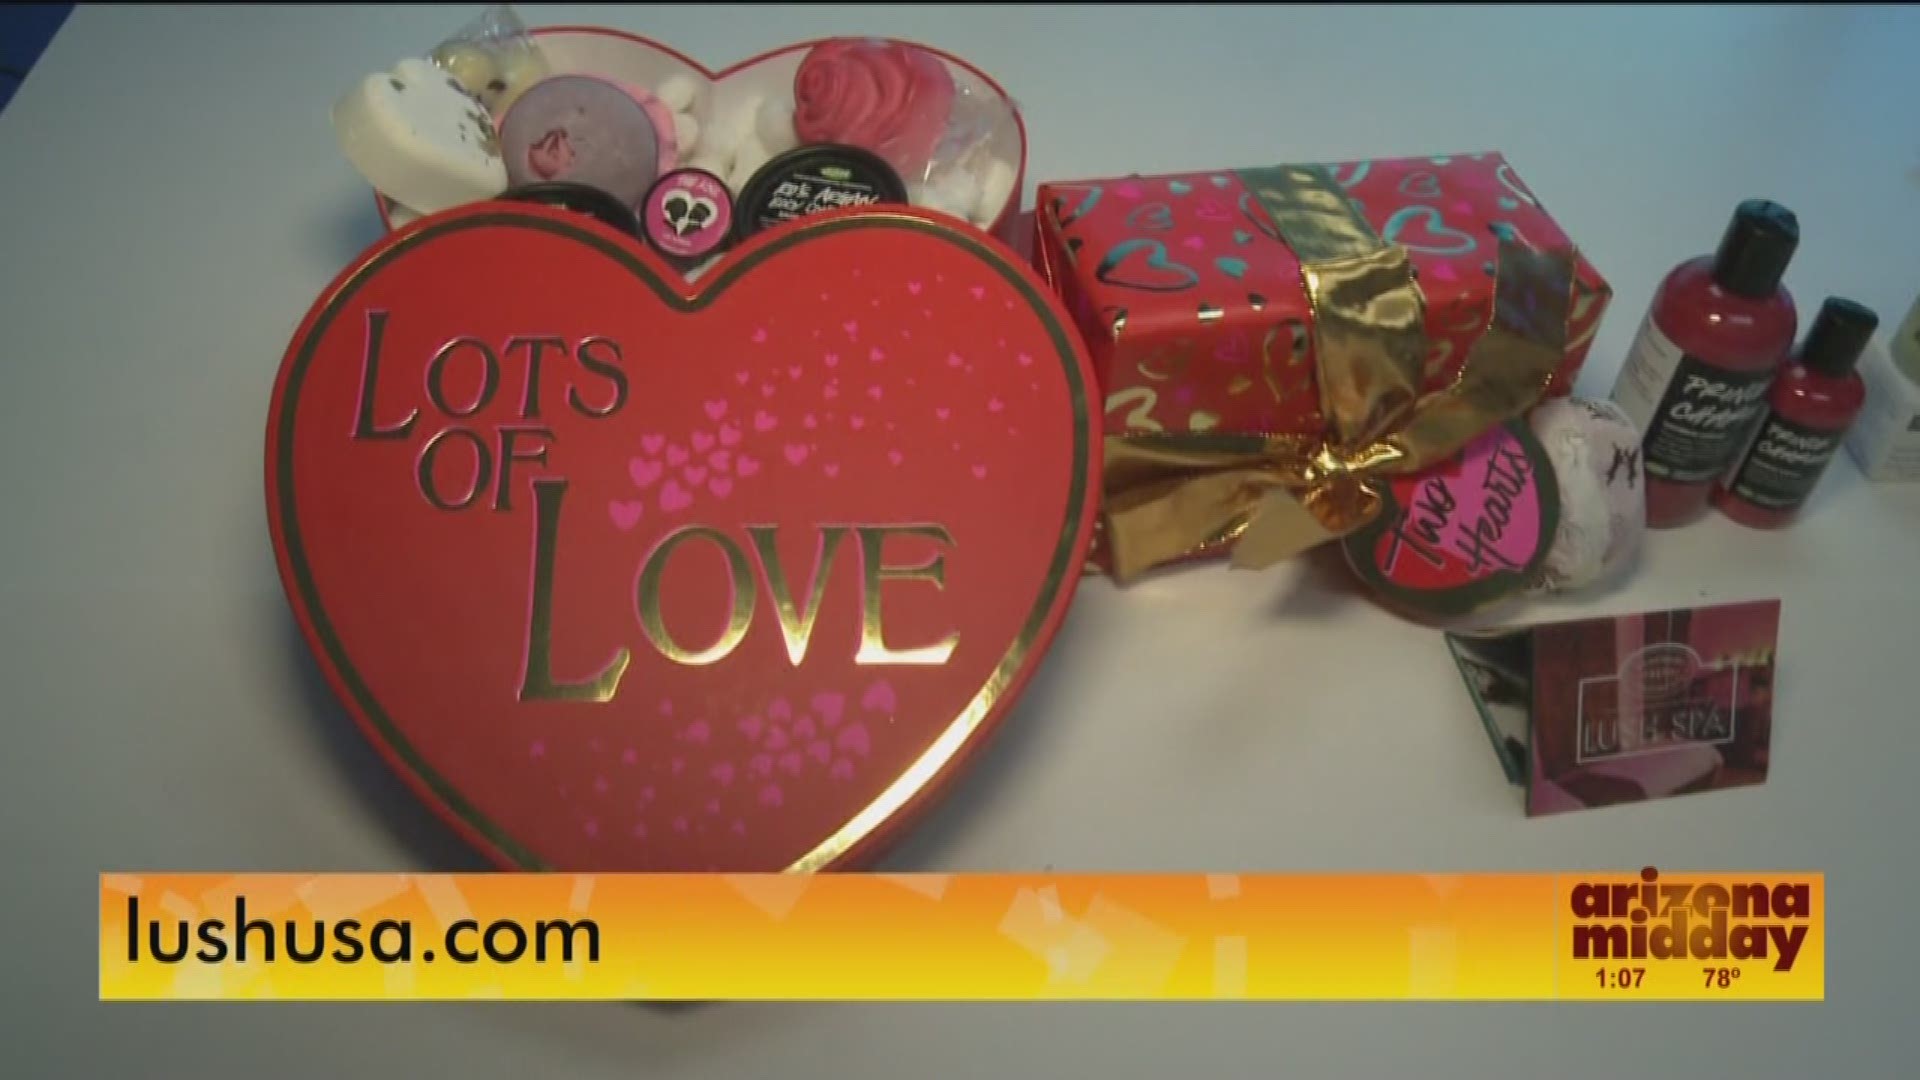 Destry's got fun gift ideas to make sure you cover all the bases for Valentine's Day.